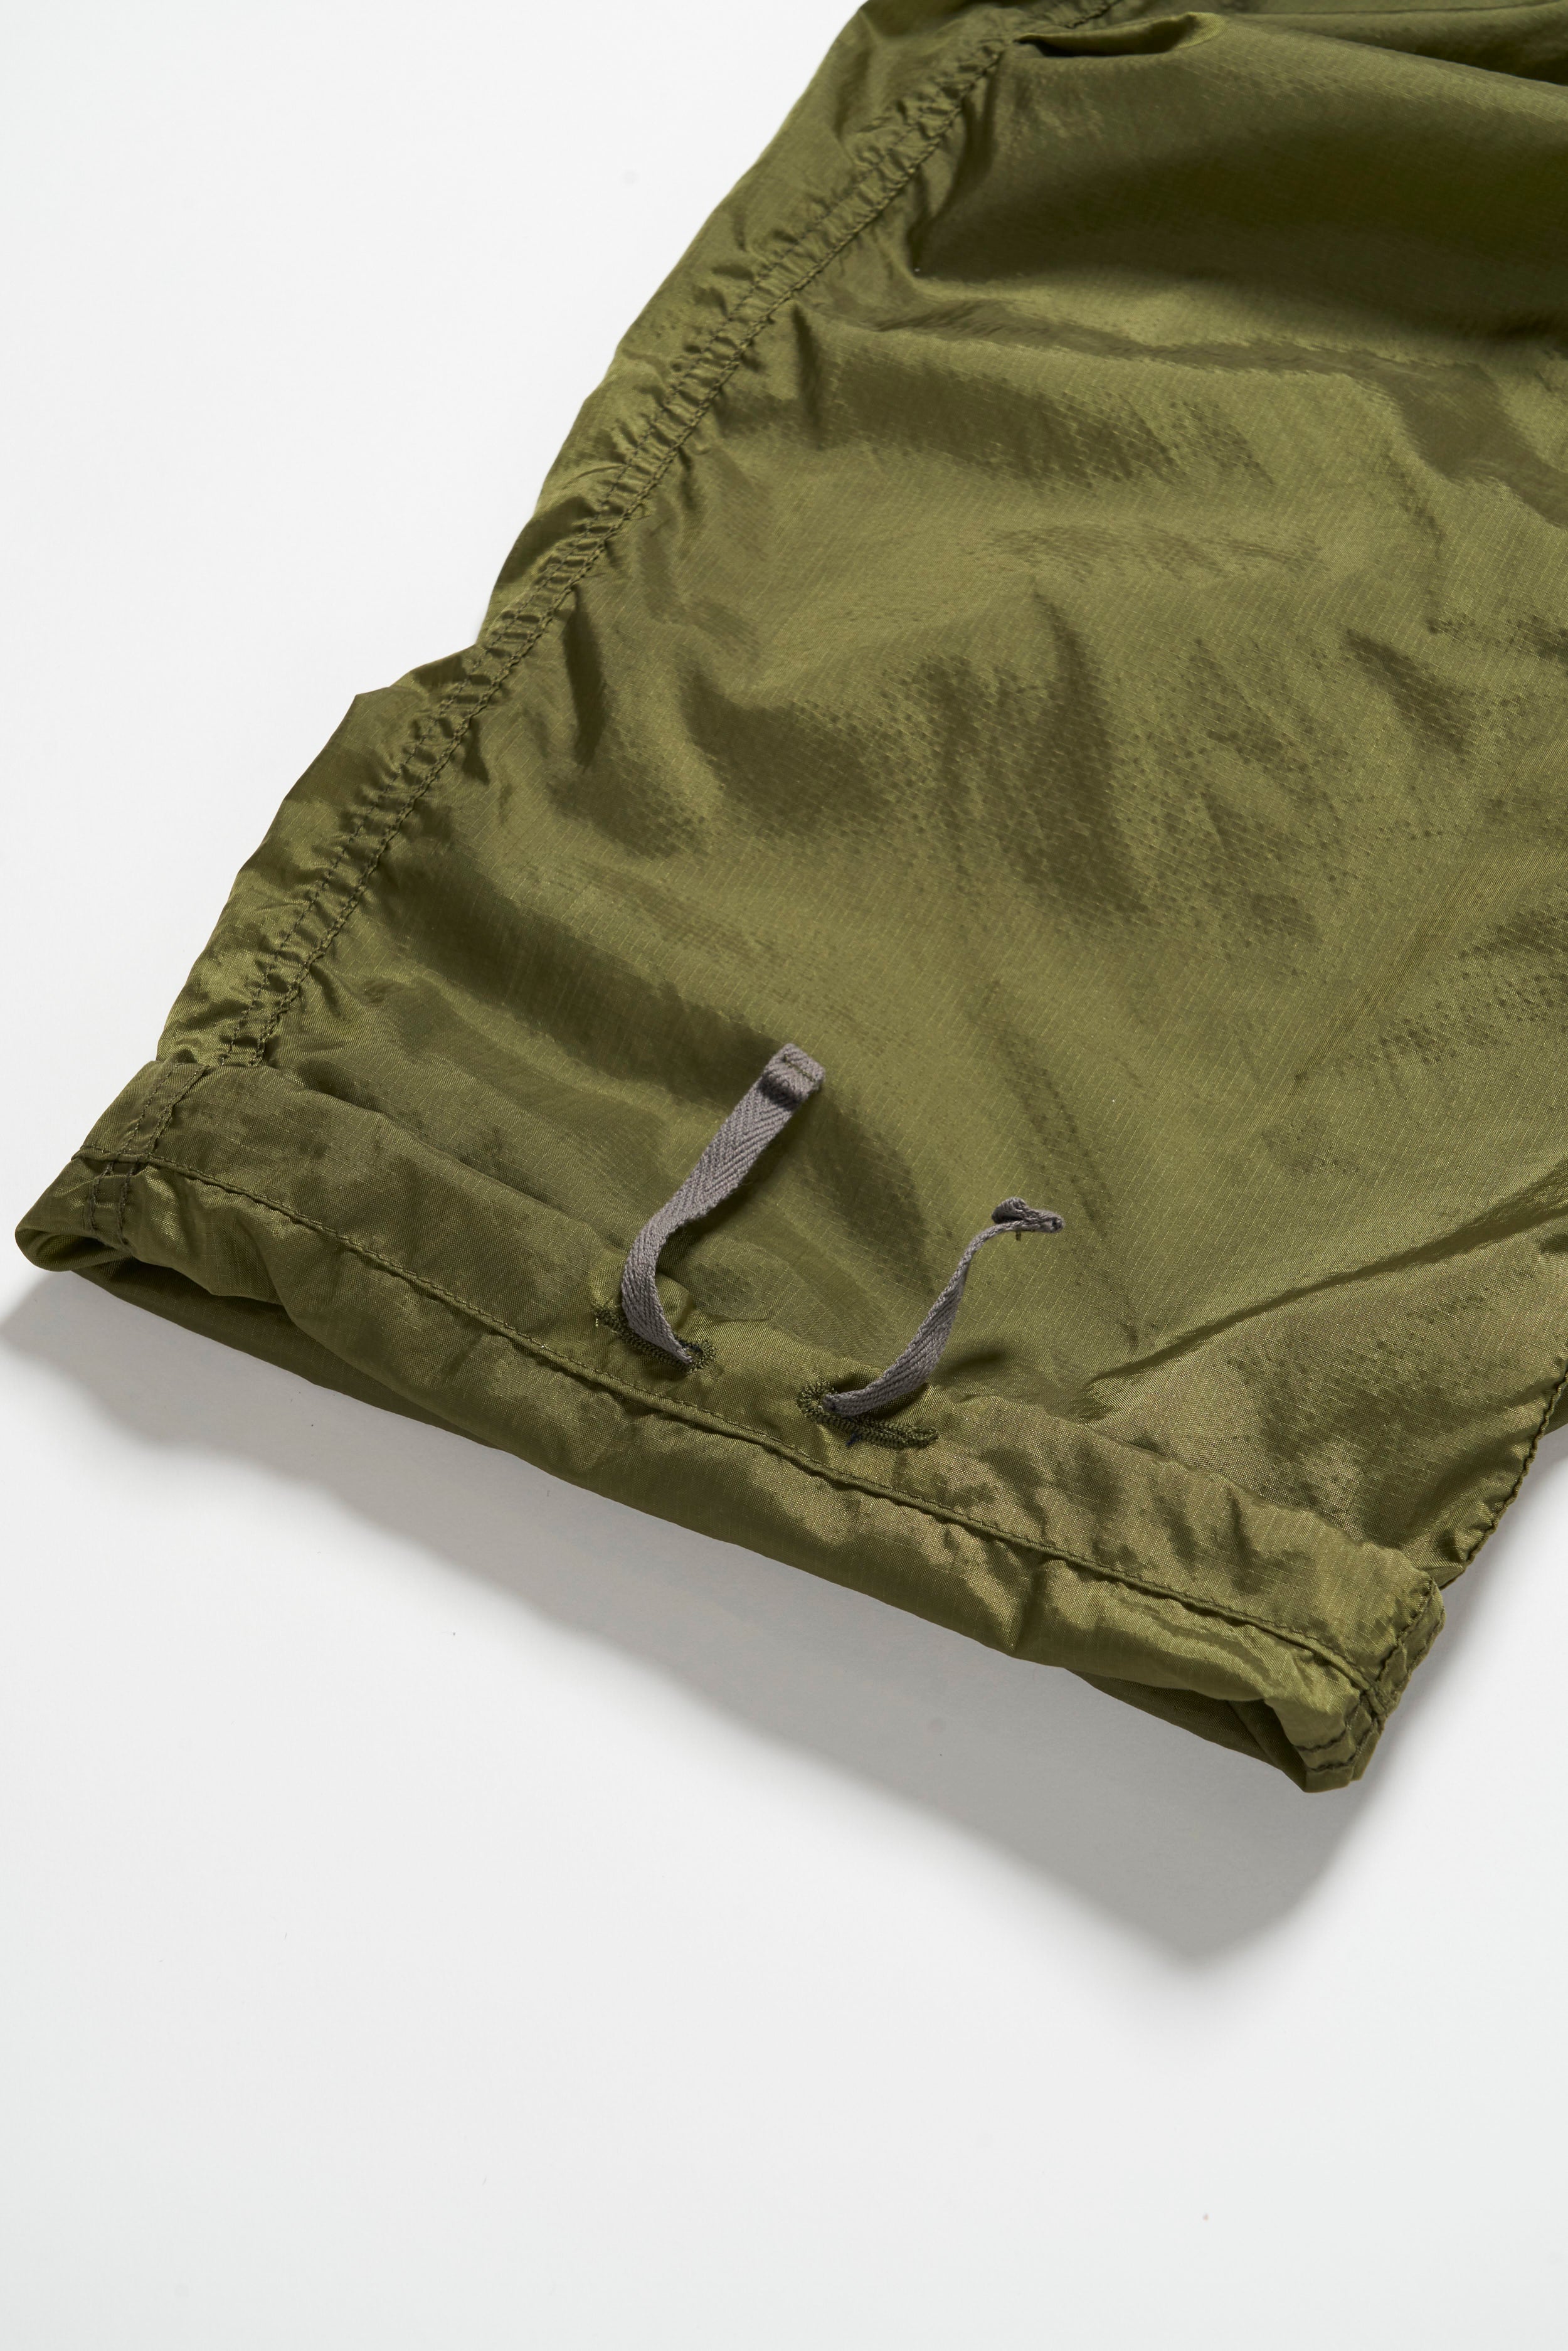 Over Pant - Olive Nylon Ripstop